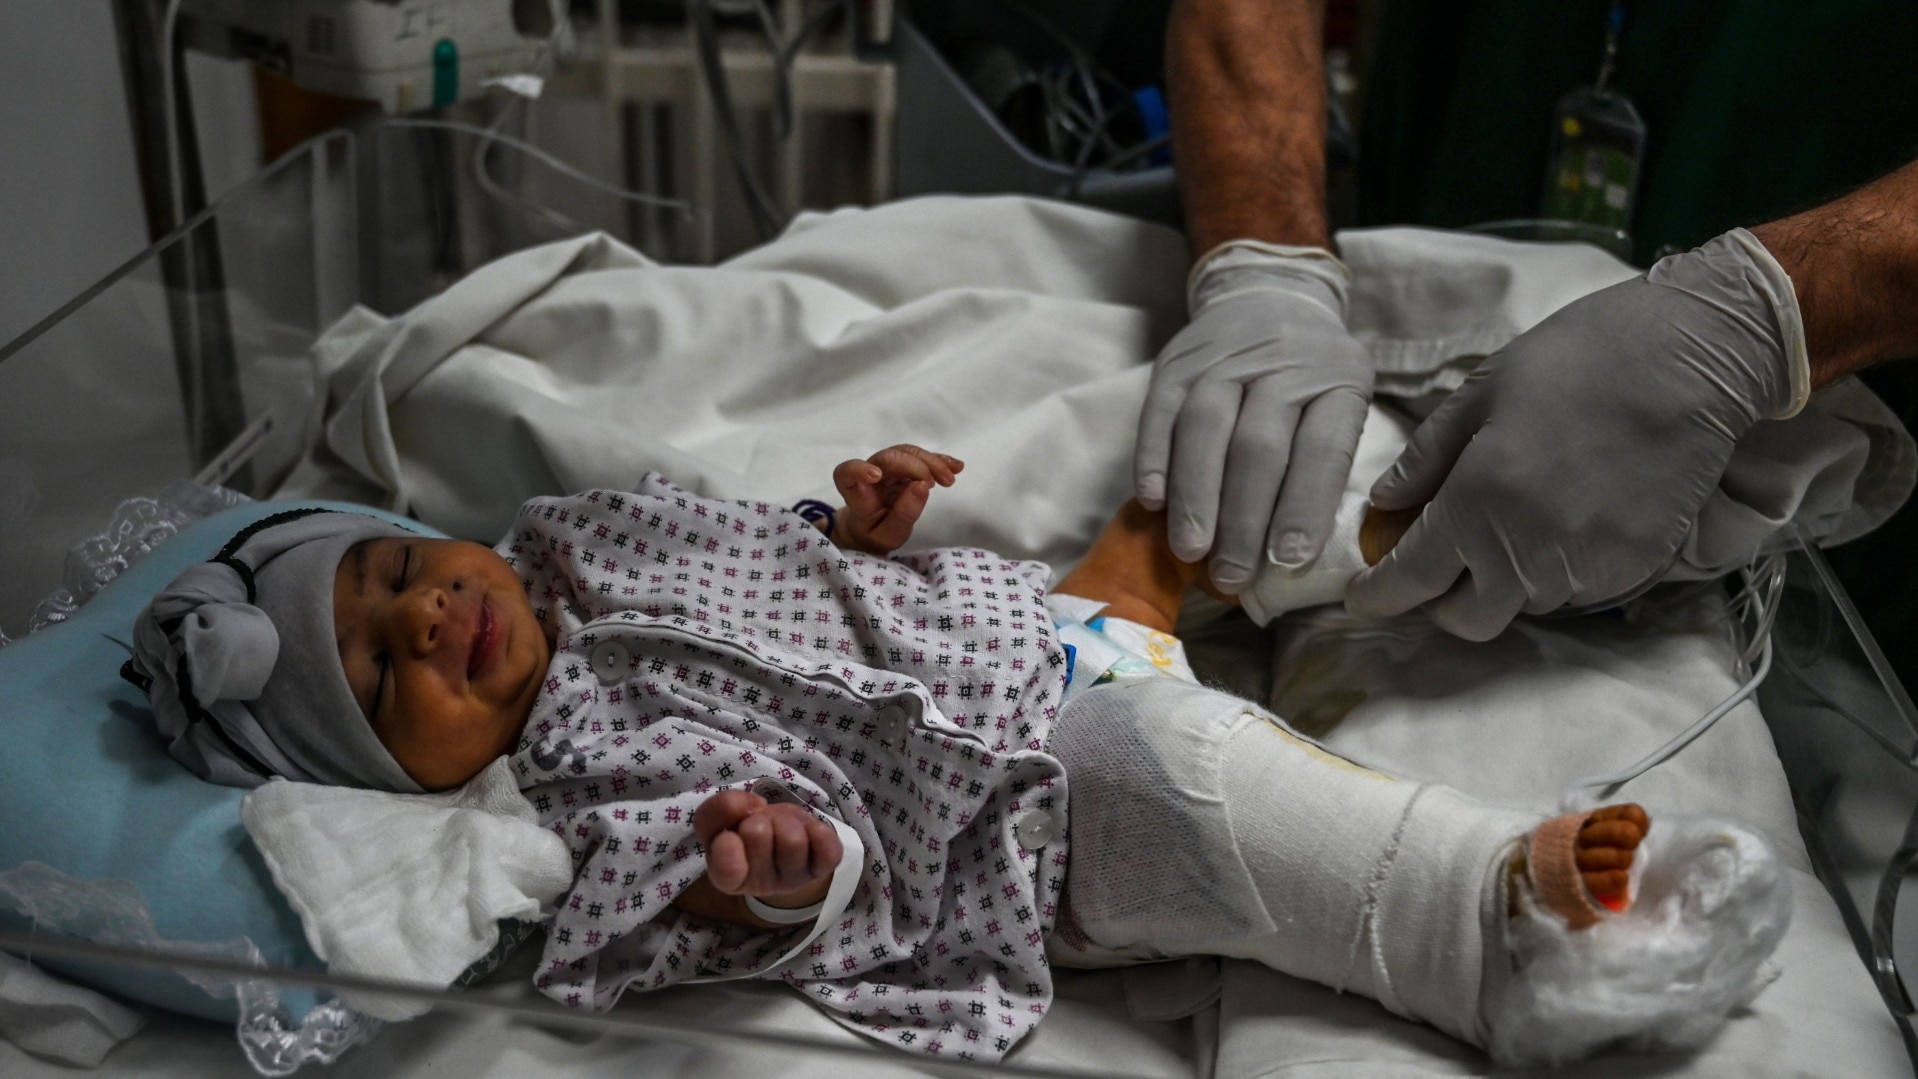 After losing her mother in the attack, newborn baby Bibi Amena, receives treatment for gun wound in her right leg as she has been rescued and brought to the French Medical Institute for Children.